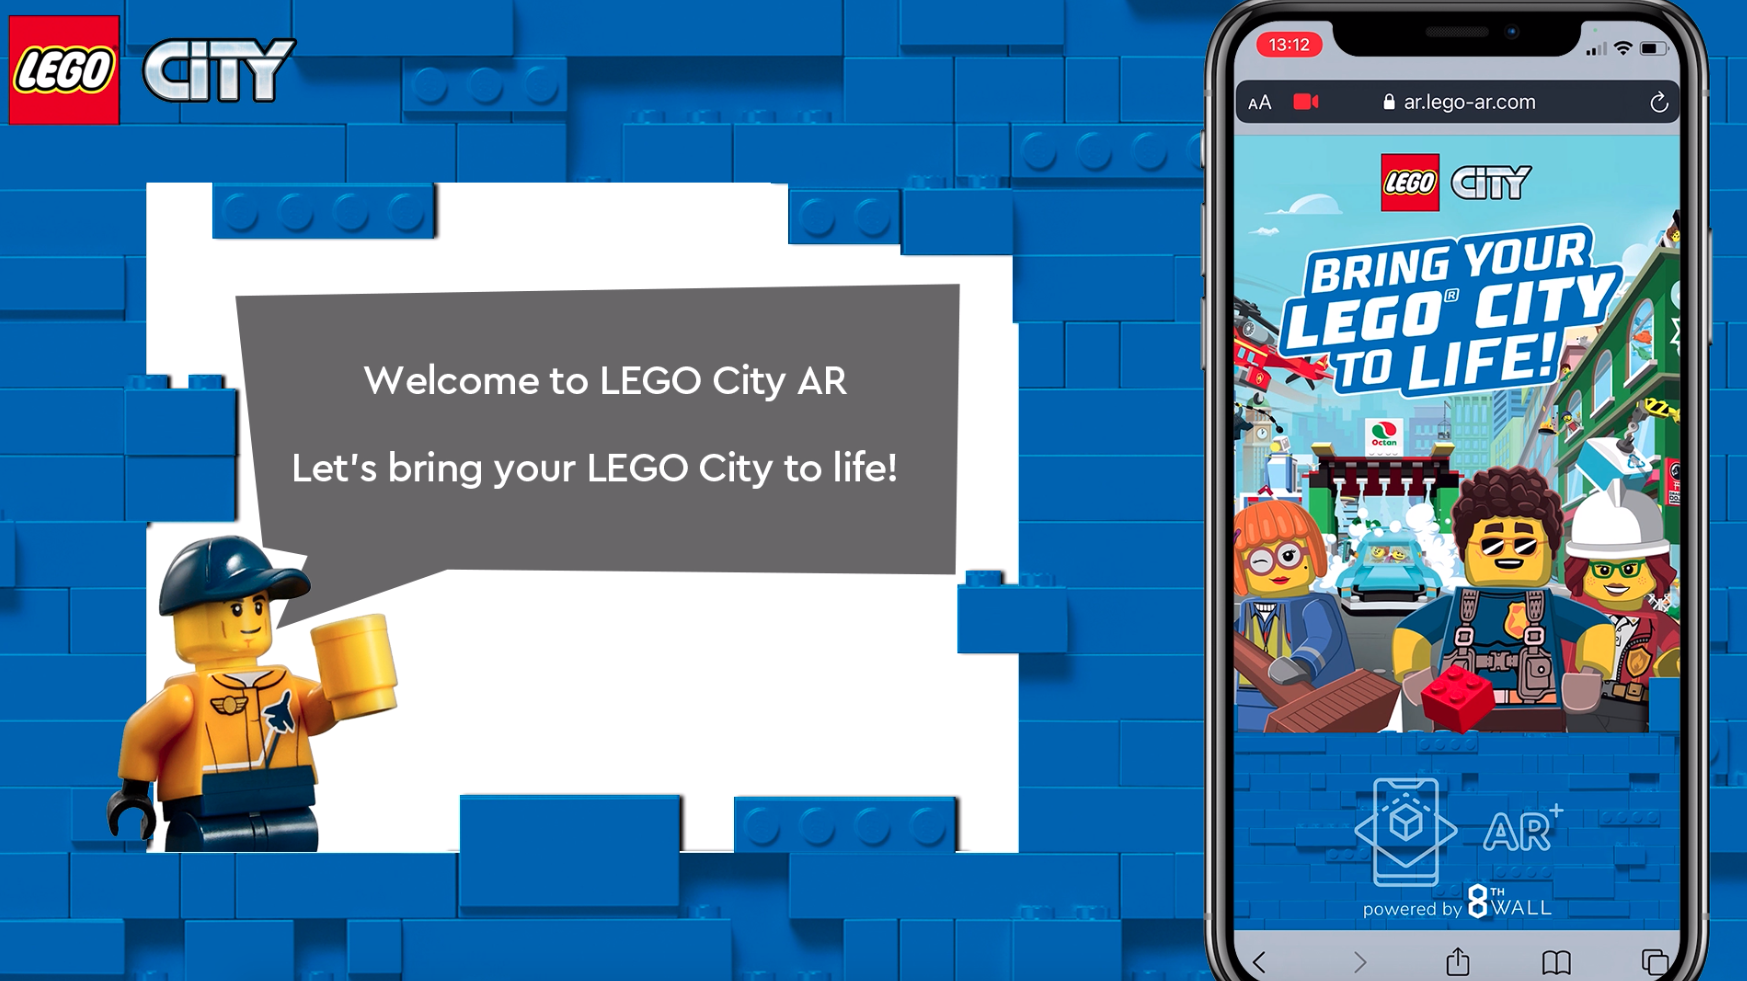 Bring your LEGO City to life using WebAR